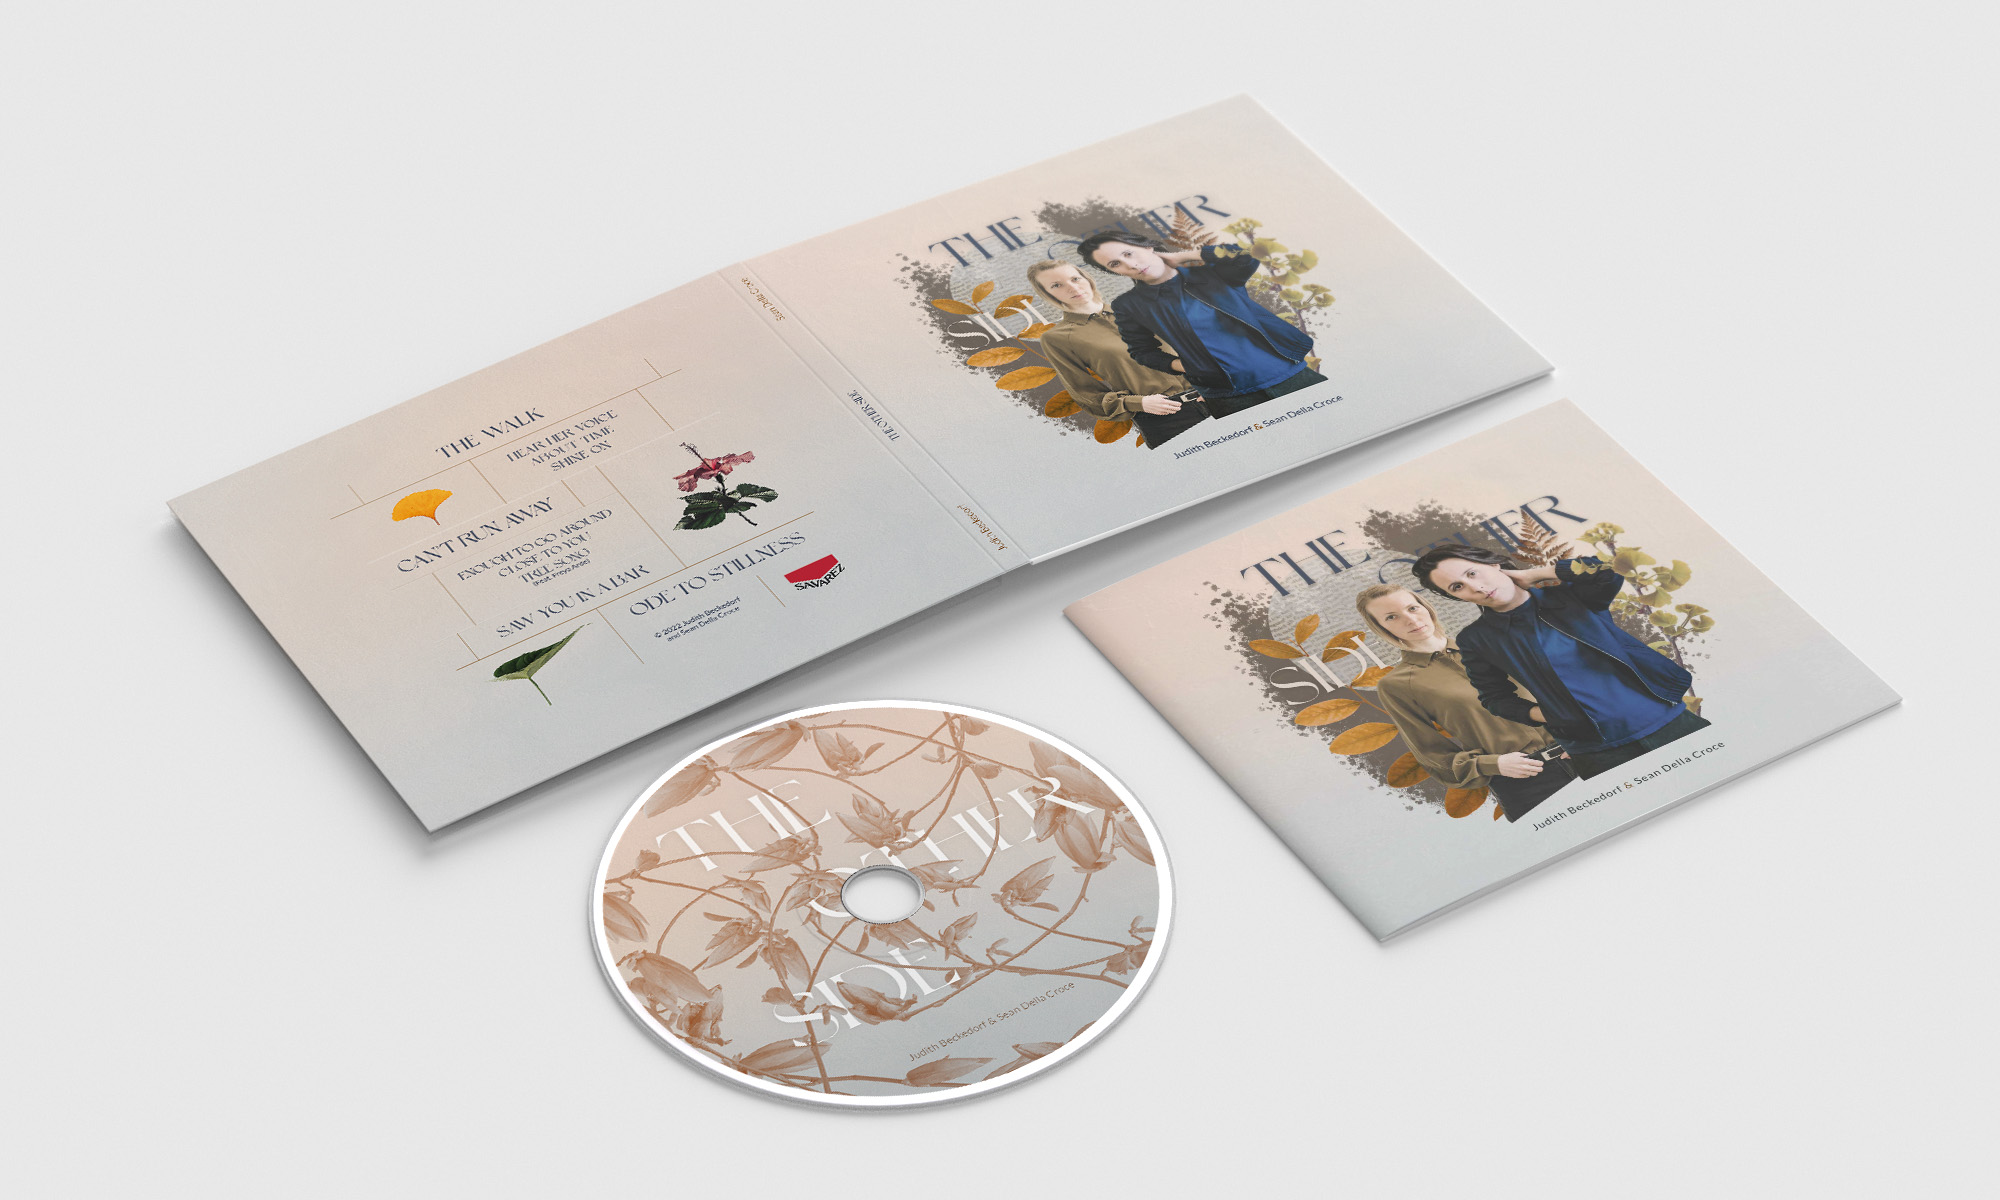 CD packaging design for the album release campaign for "The Other Side" by Yvonne Hartmann